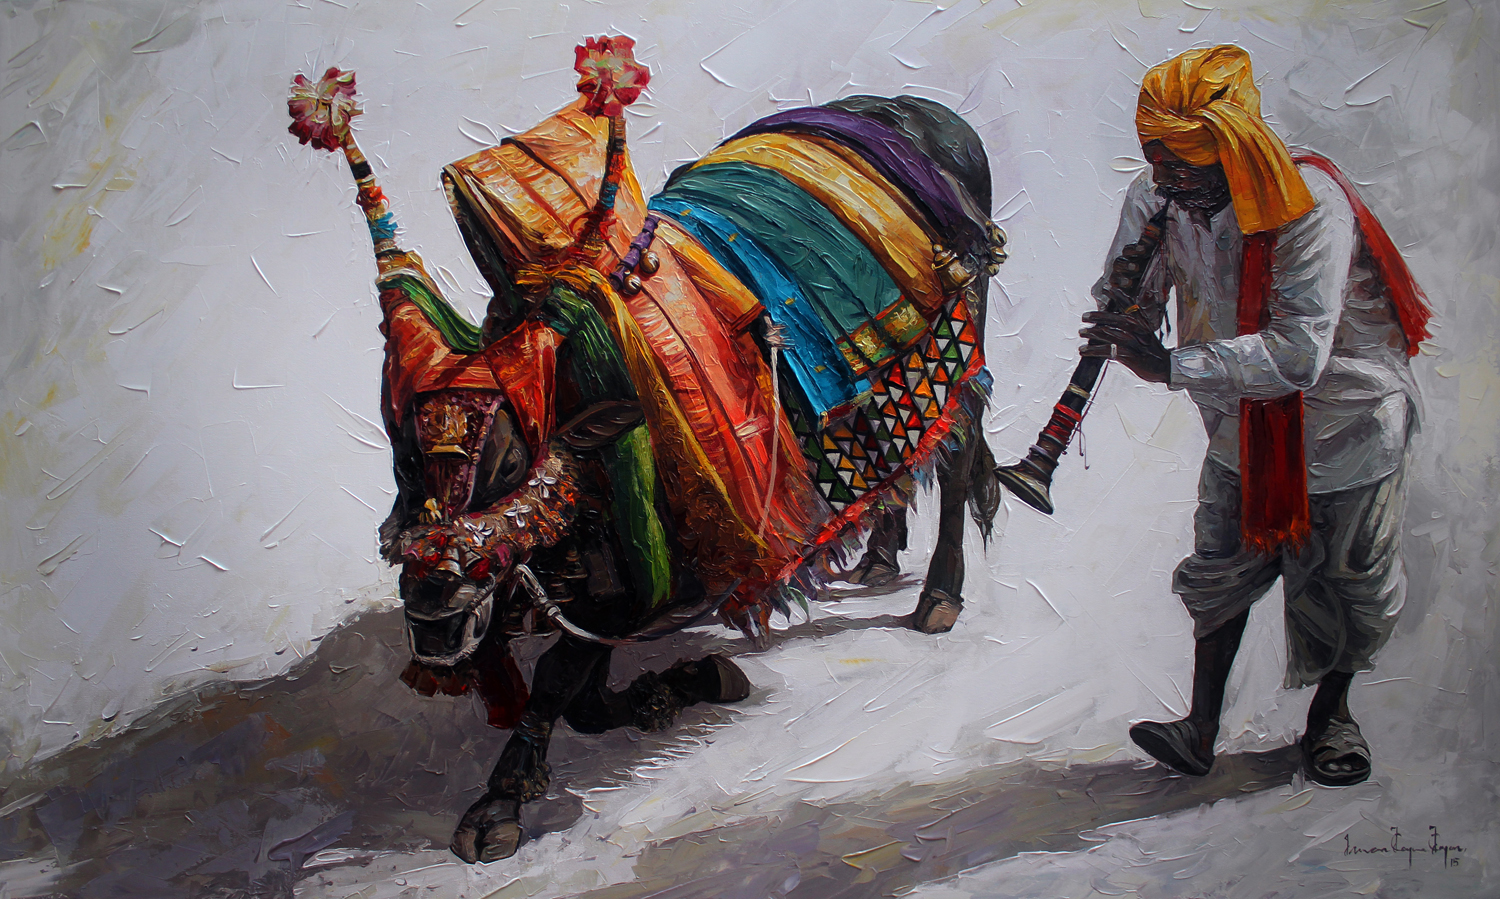 Famous Indian Culture Paintings